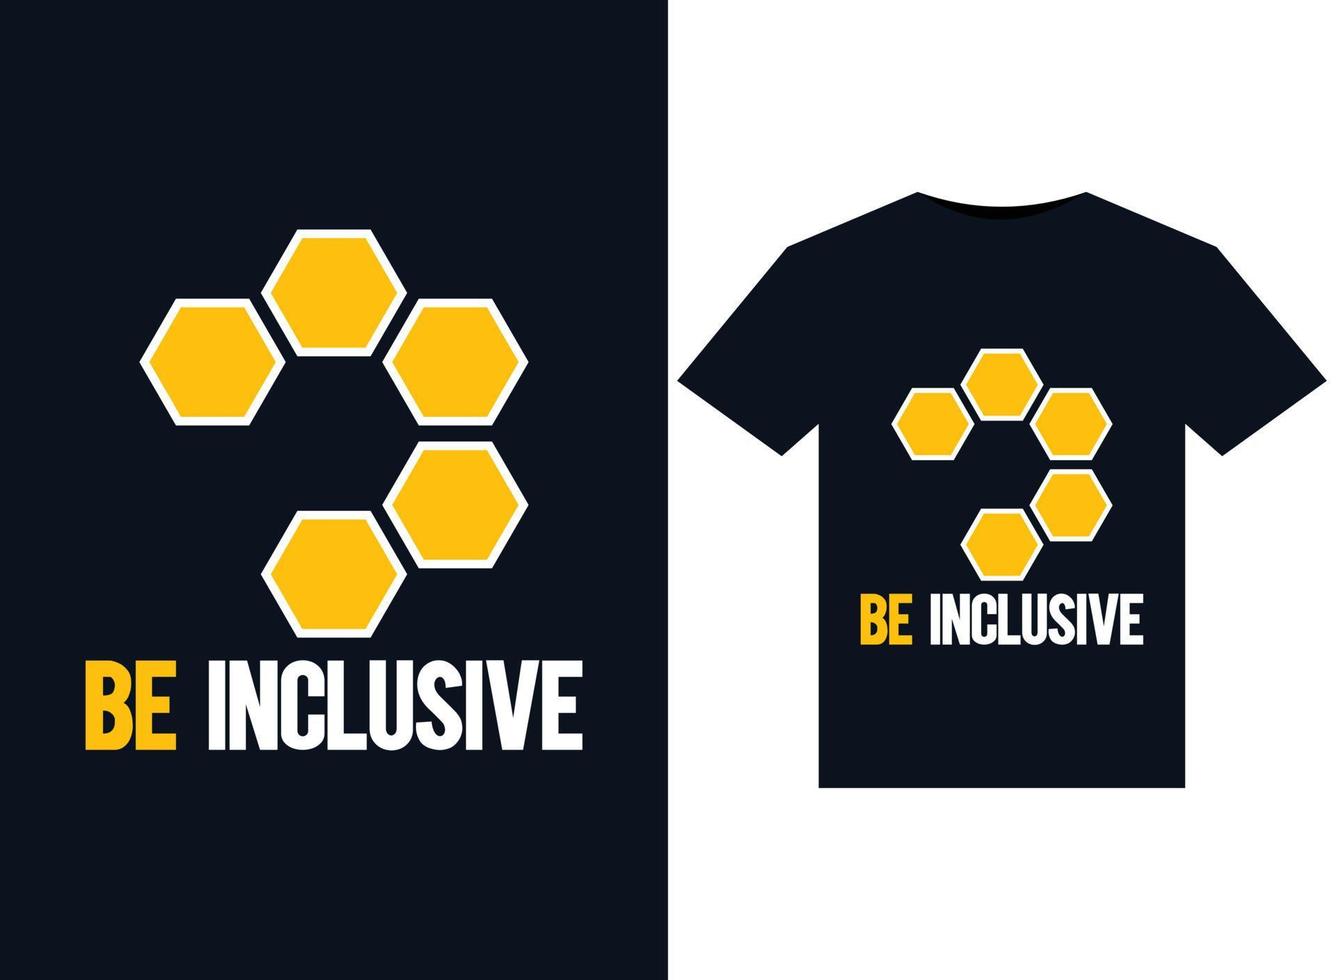 Be Inclusive illustrations for print-ready T-Shirts design vector